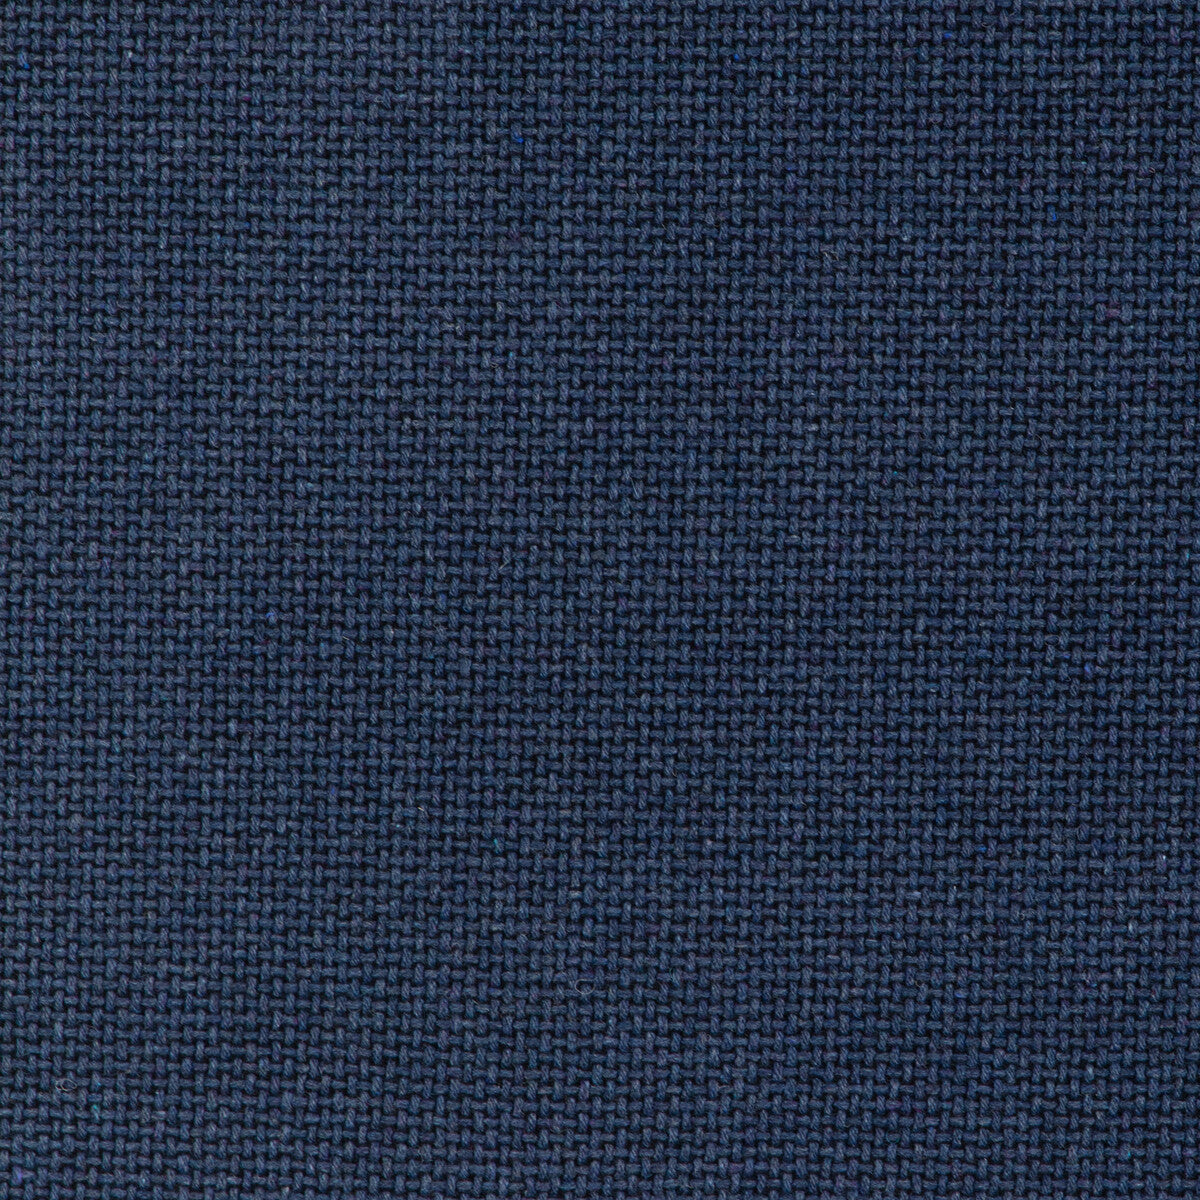 Easton Wool fabric in blueberry color - pattern 37027.510.0 - by Kravet Contract